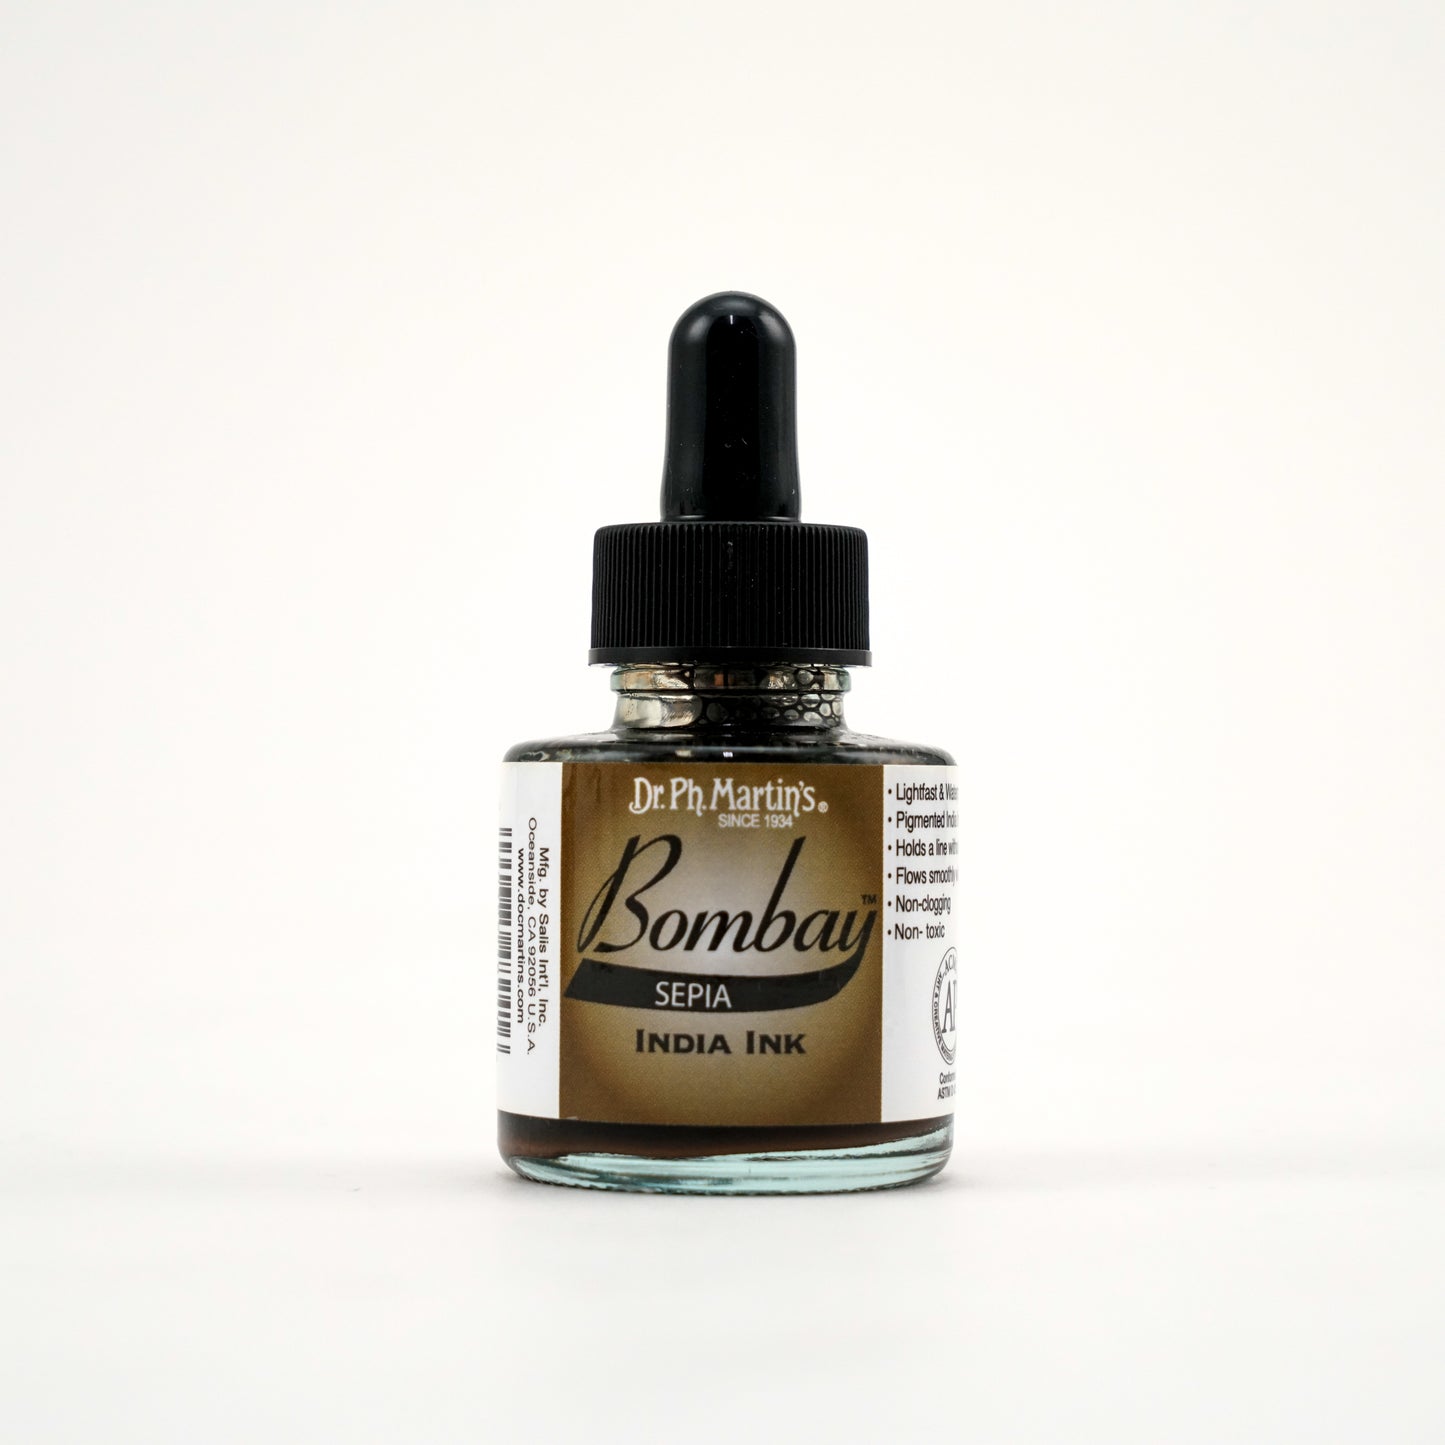 Dr. Ph. Martin's Bombay India Ink - Sepia by Dr. Ph. Martin’s - K. A. Artist Shop